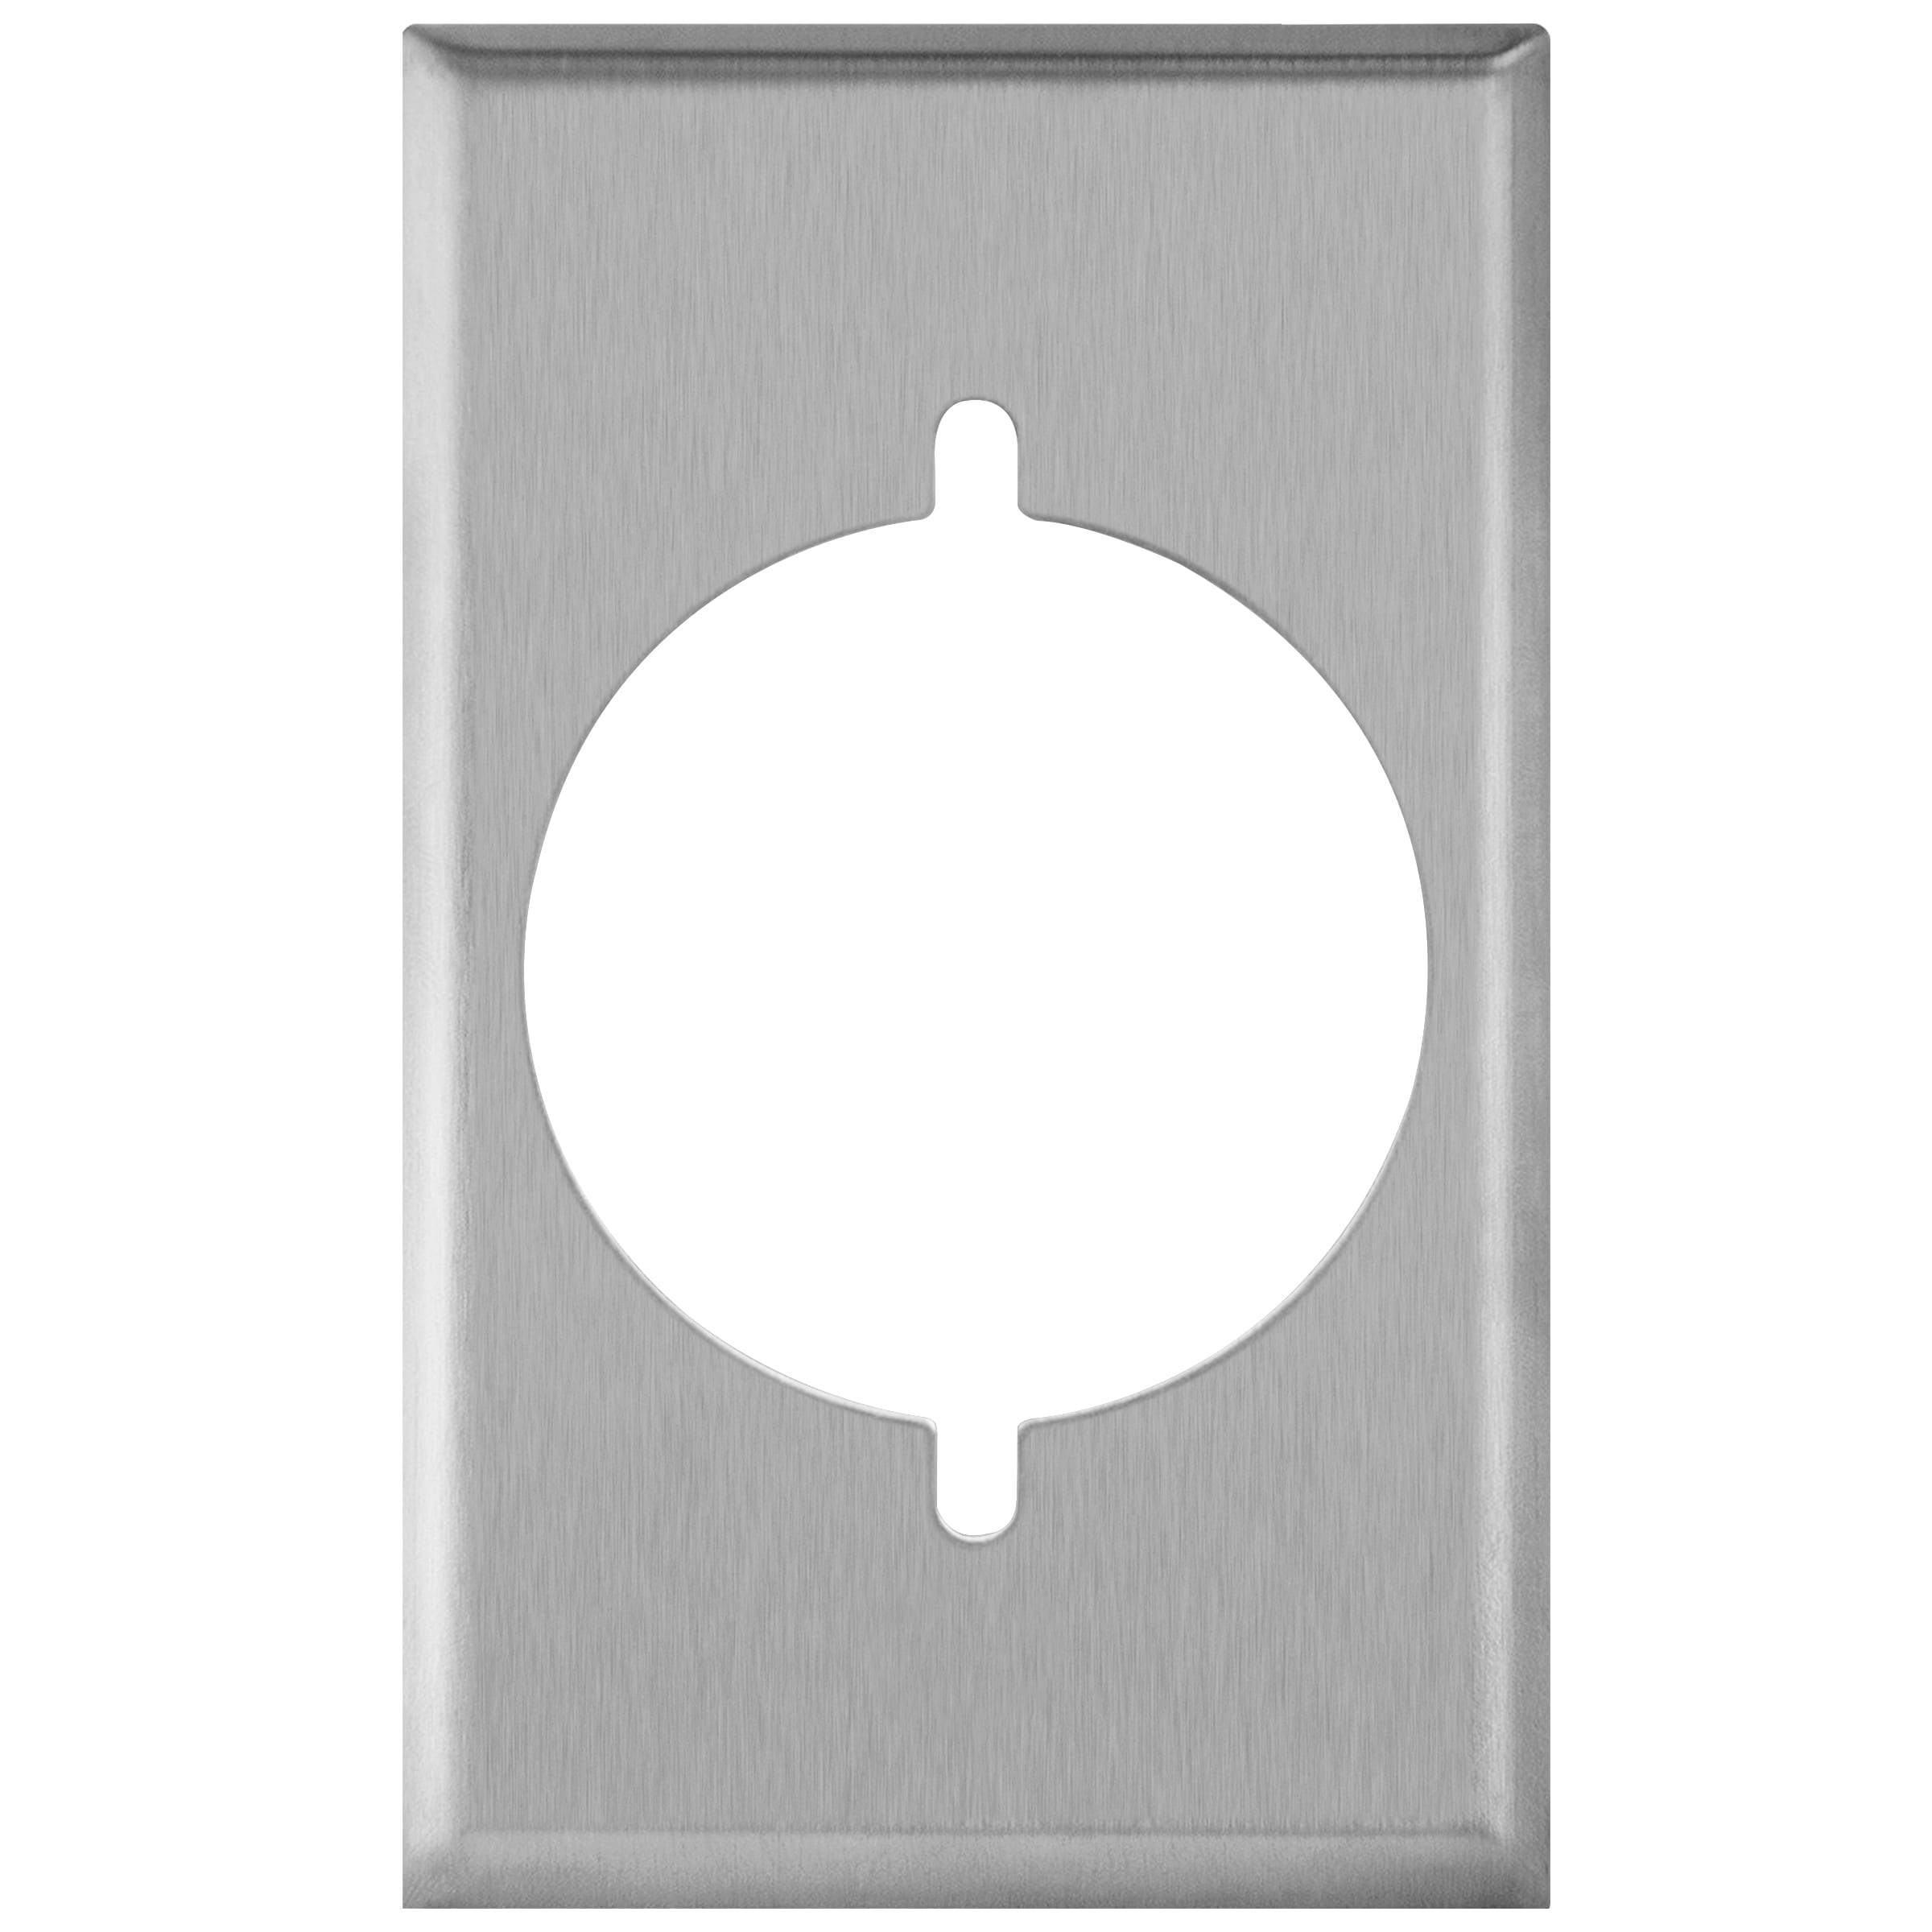 1-Gang Stainless Steel 2.125" Hole Receptacle Wall Plate